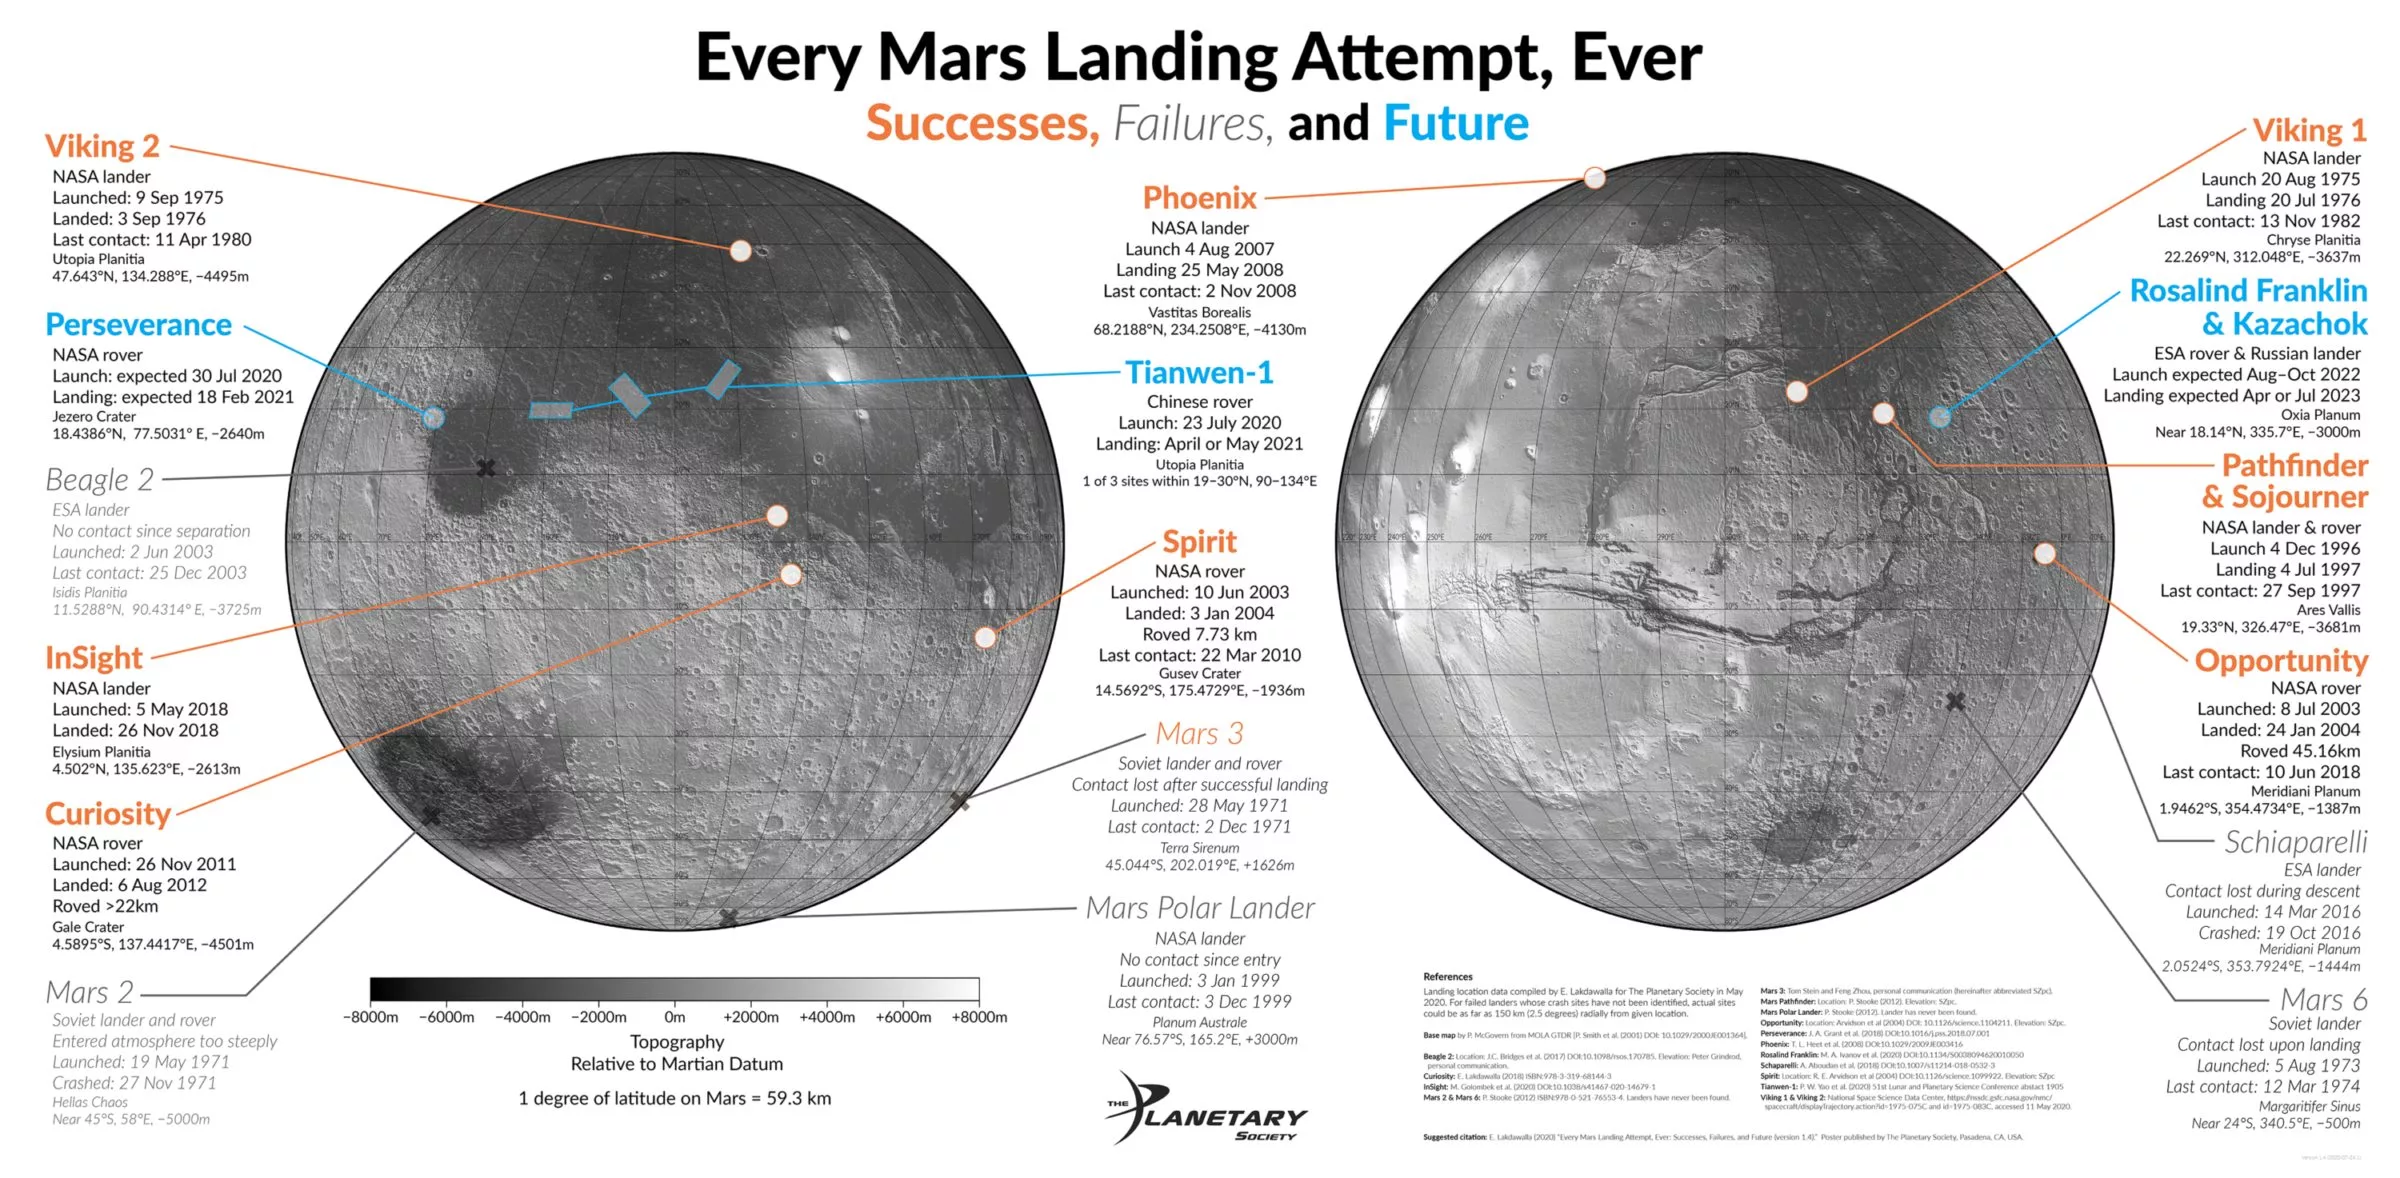 EVERY MARS LANDING ATTEMPT, EVER